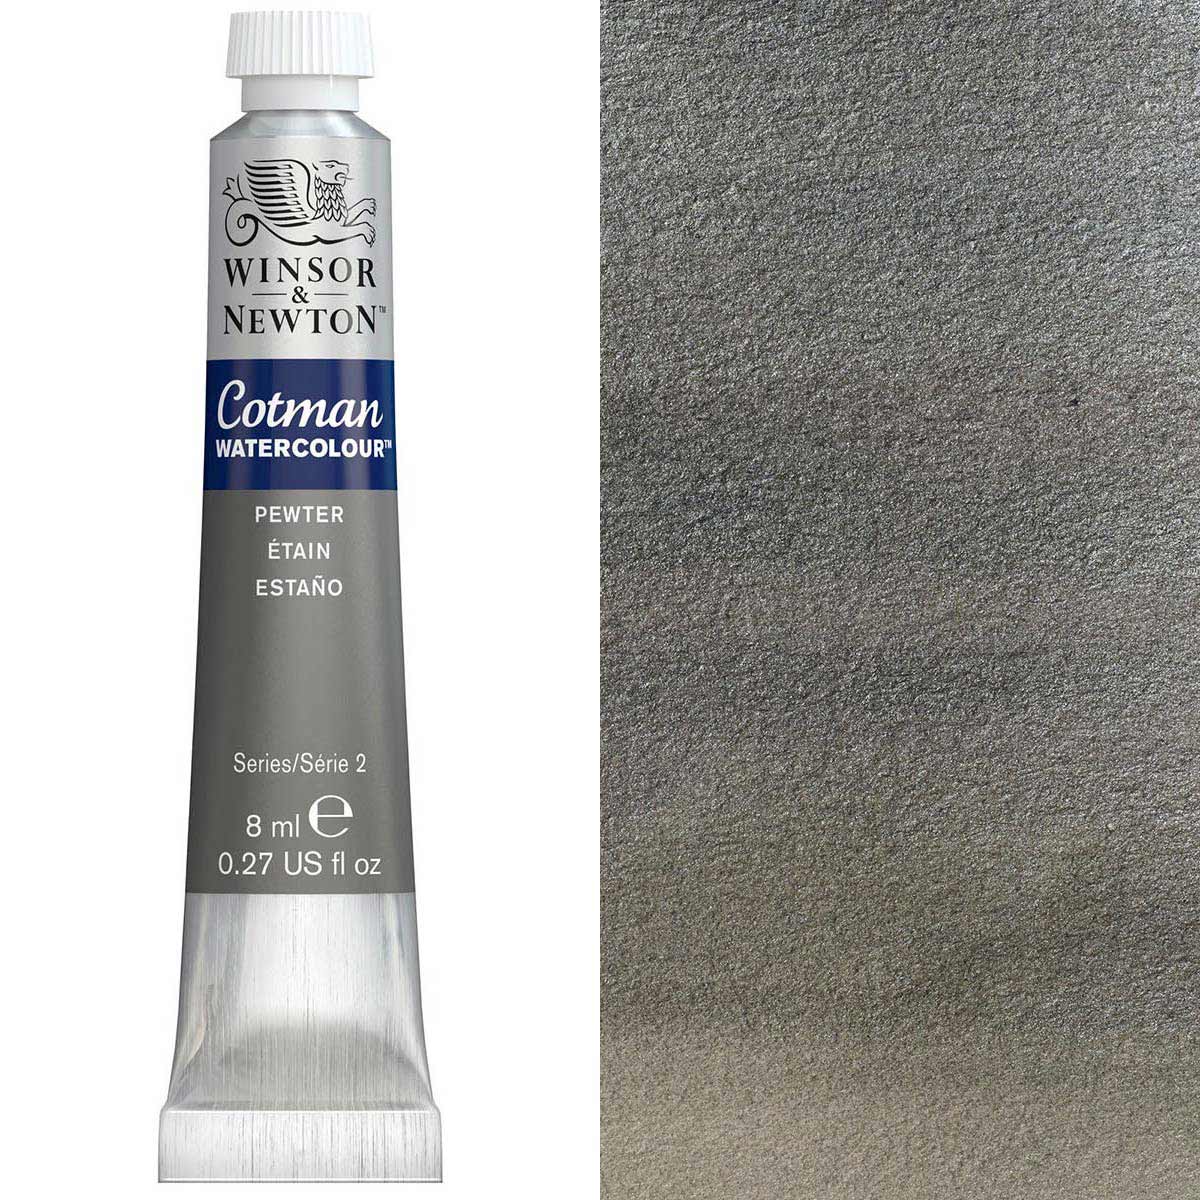 Winsor and Newton - Cotman Watercolour - 8ml - Pewter